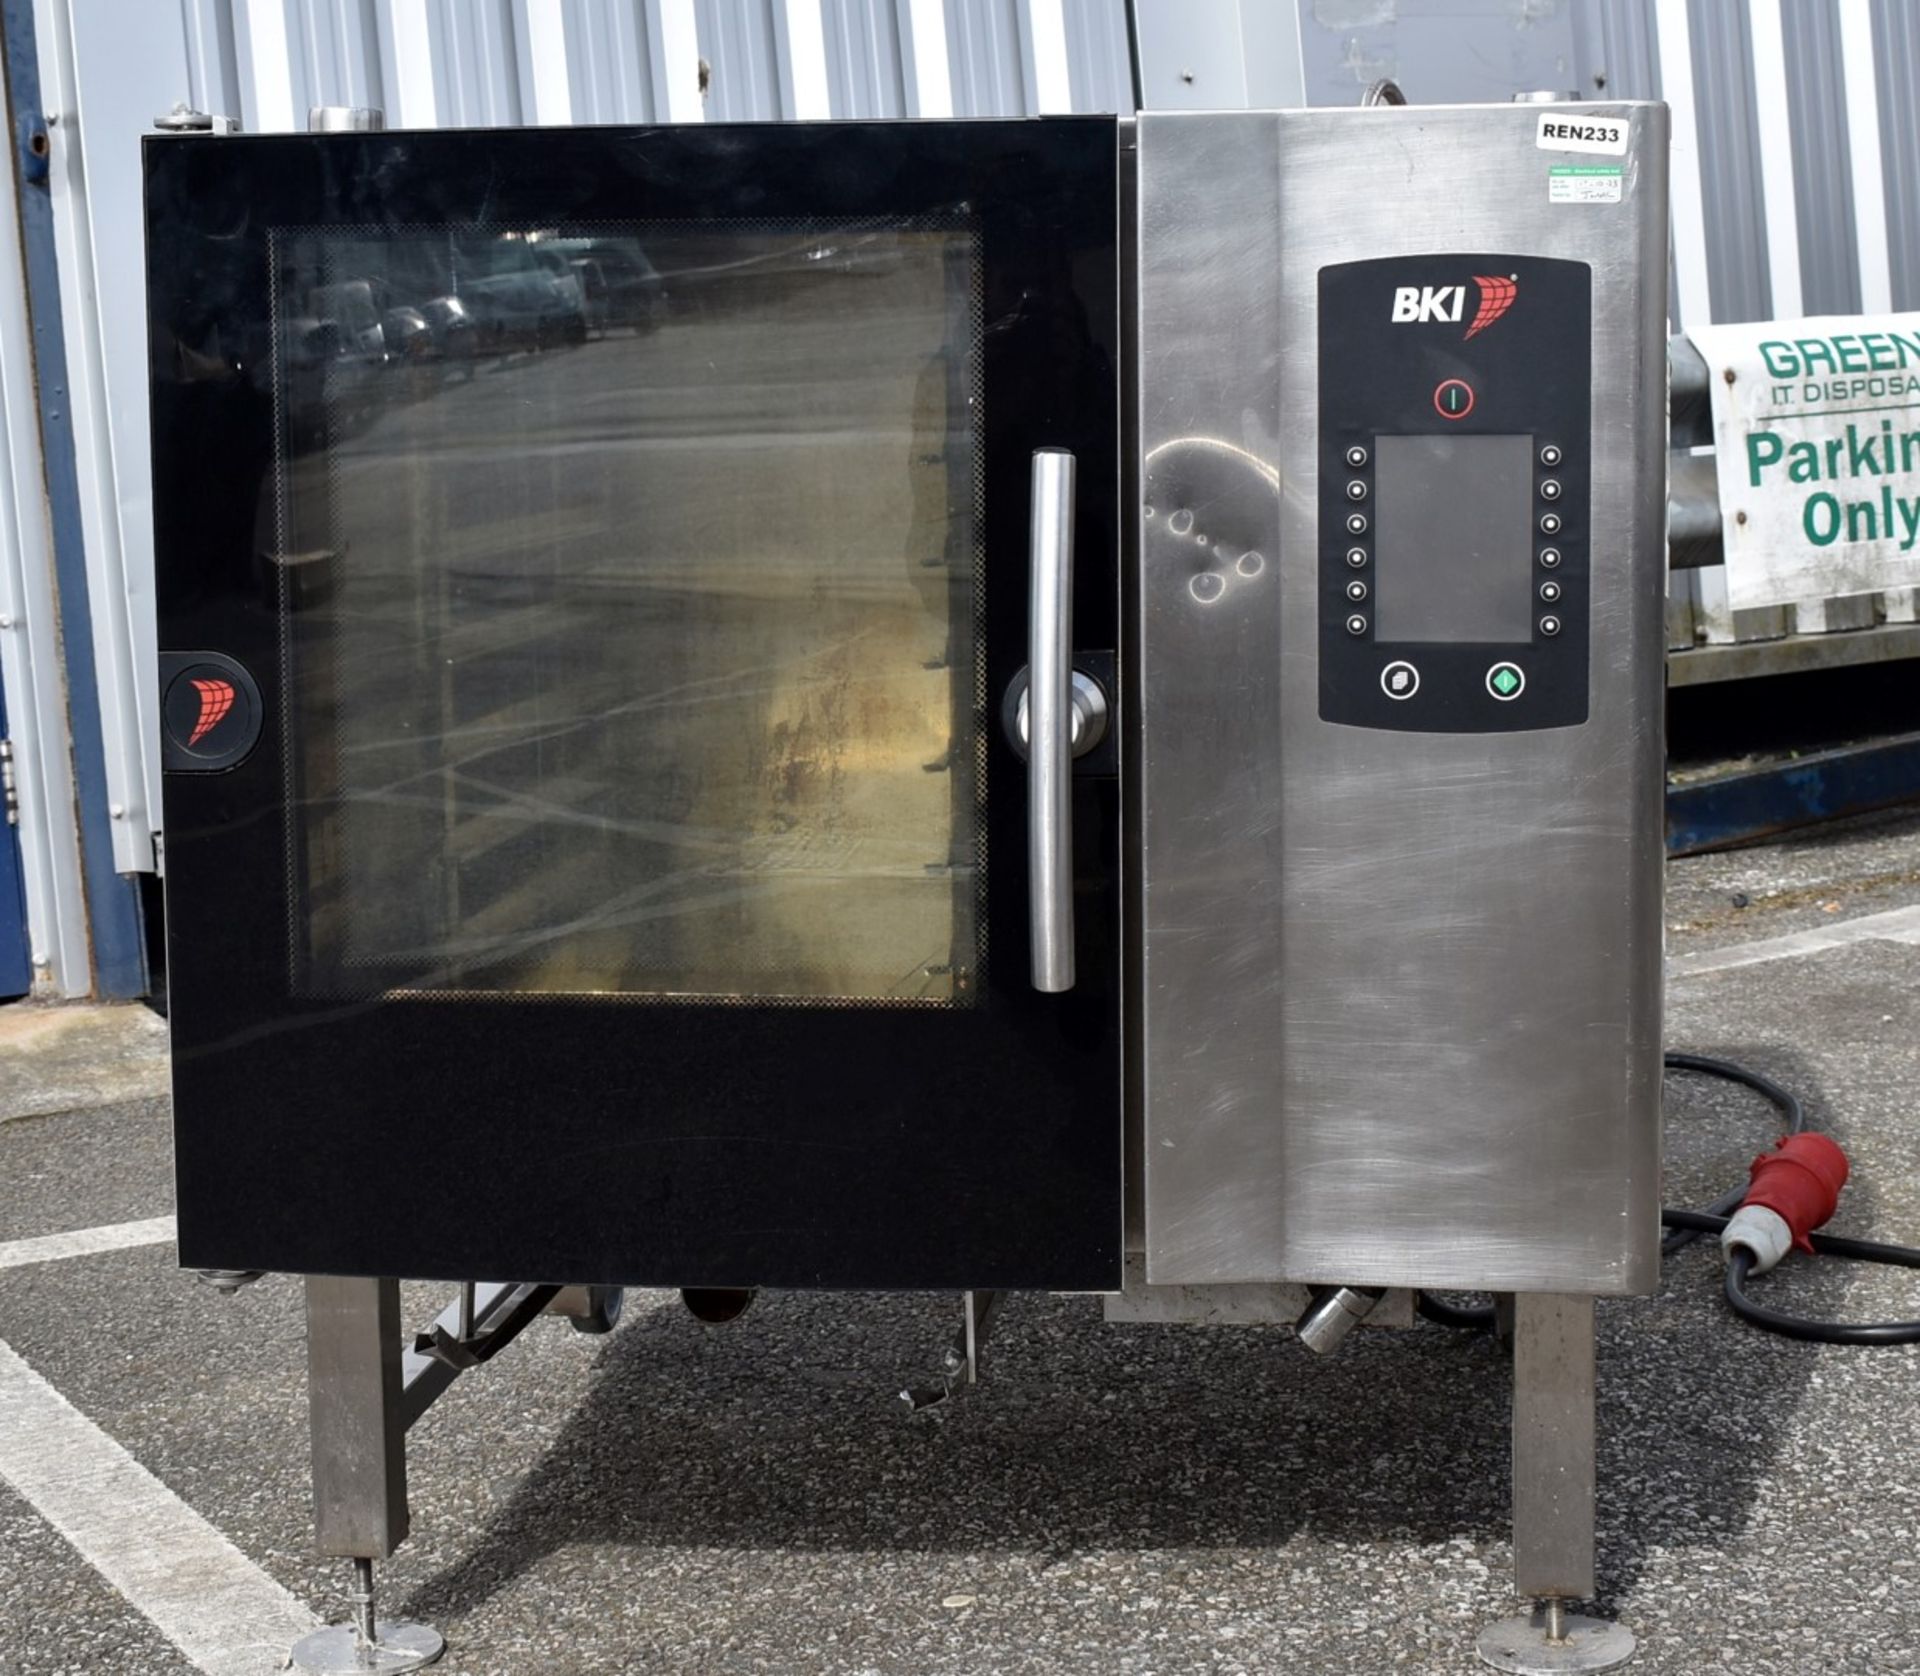 1 x Houno CPE 1.06 Electric Combi Oven - 3 Phase Combi Oven With Various Pre-Set Cooking Options - Image 6 of 10